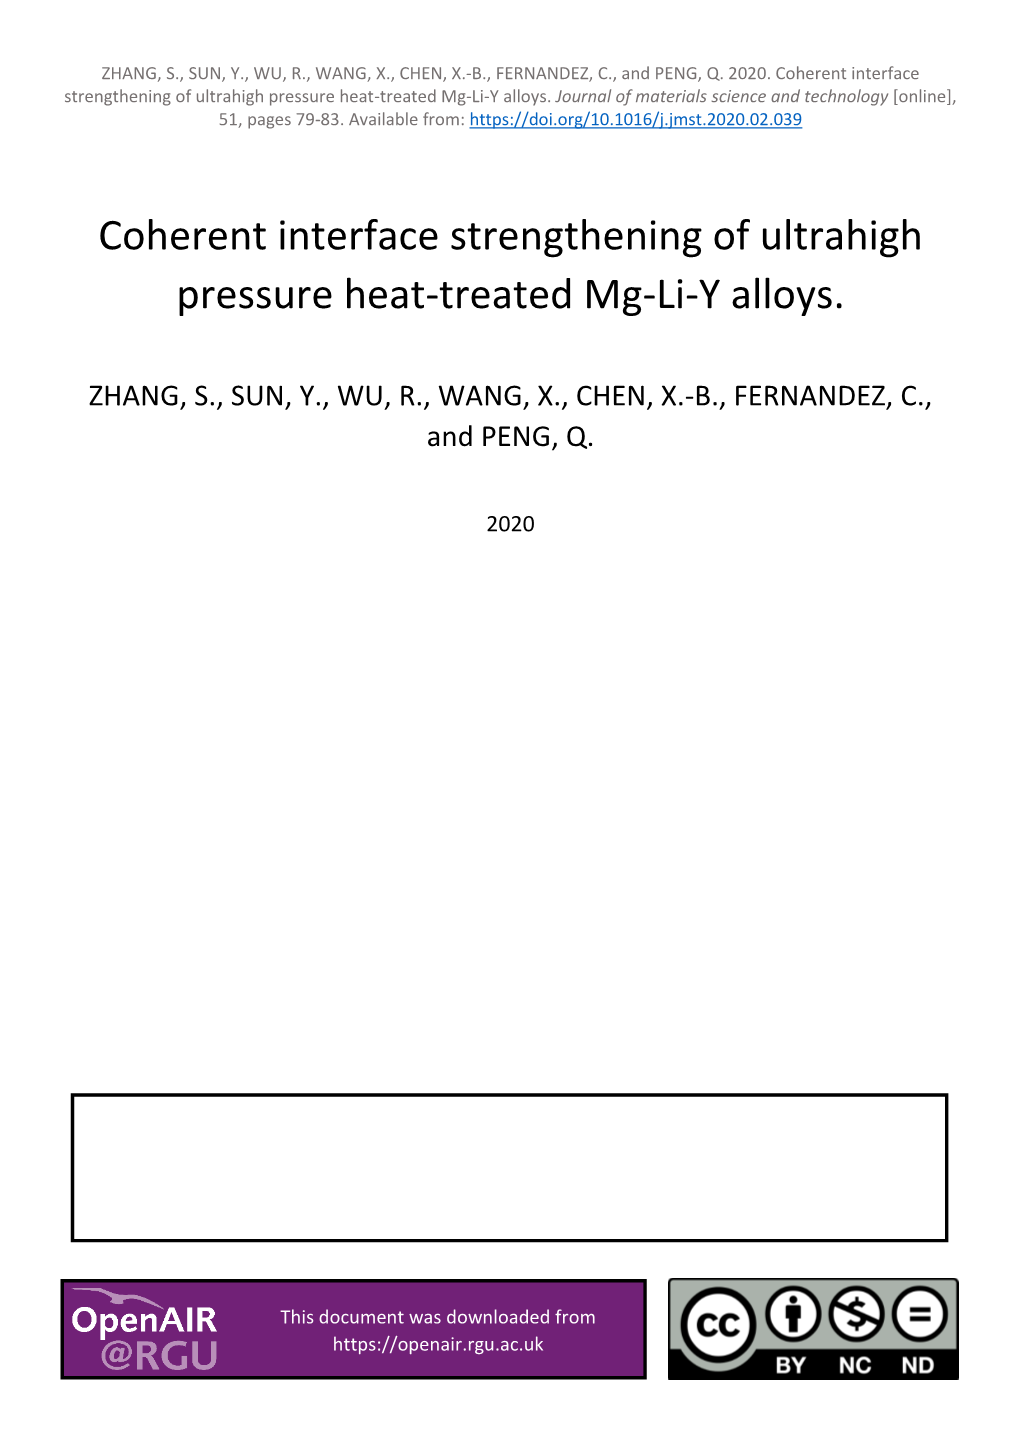 Coherent Interface Strengthening of Ultrahigh Pressure Heat-Treated Mg-Li-Y Alloys. Journal of Materials Science and Technology [Online], 51, Pages 79-83